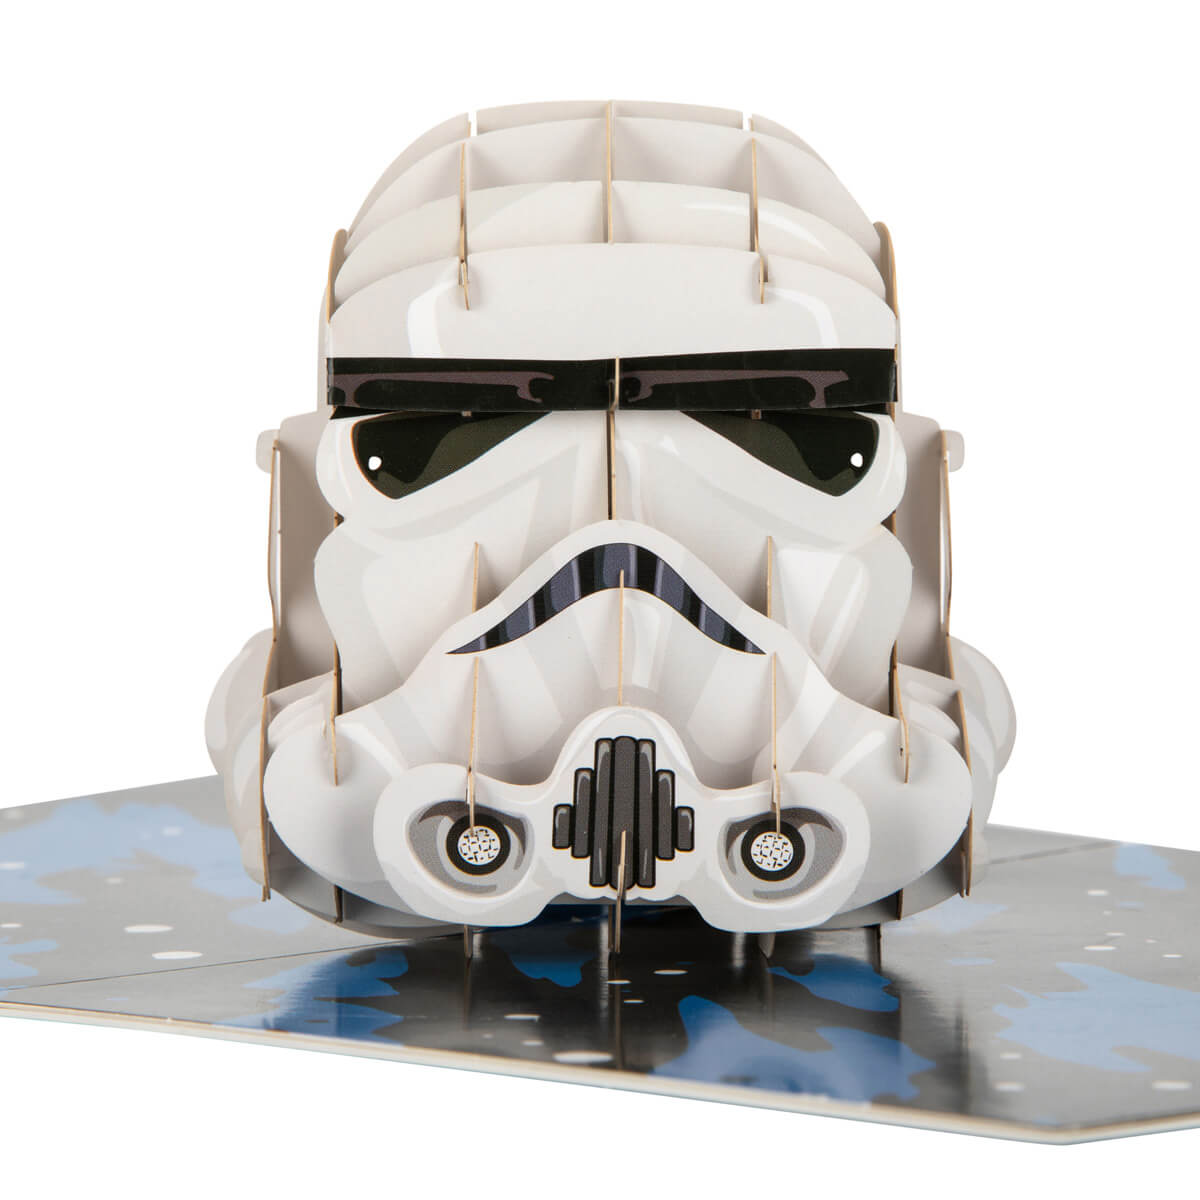 Original Stormtrooper Helmet Pop Up Card For Father's Day, close up image